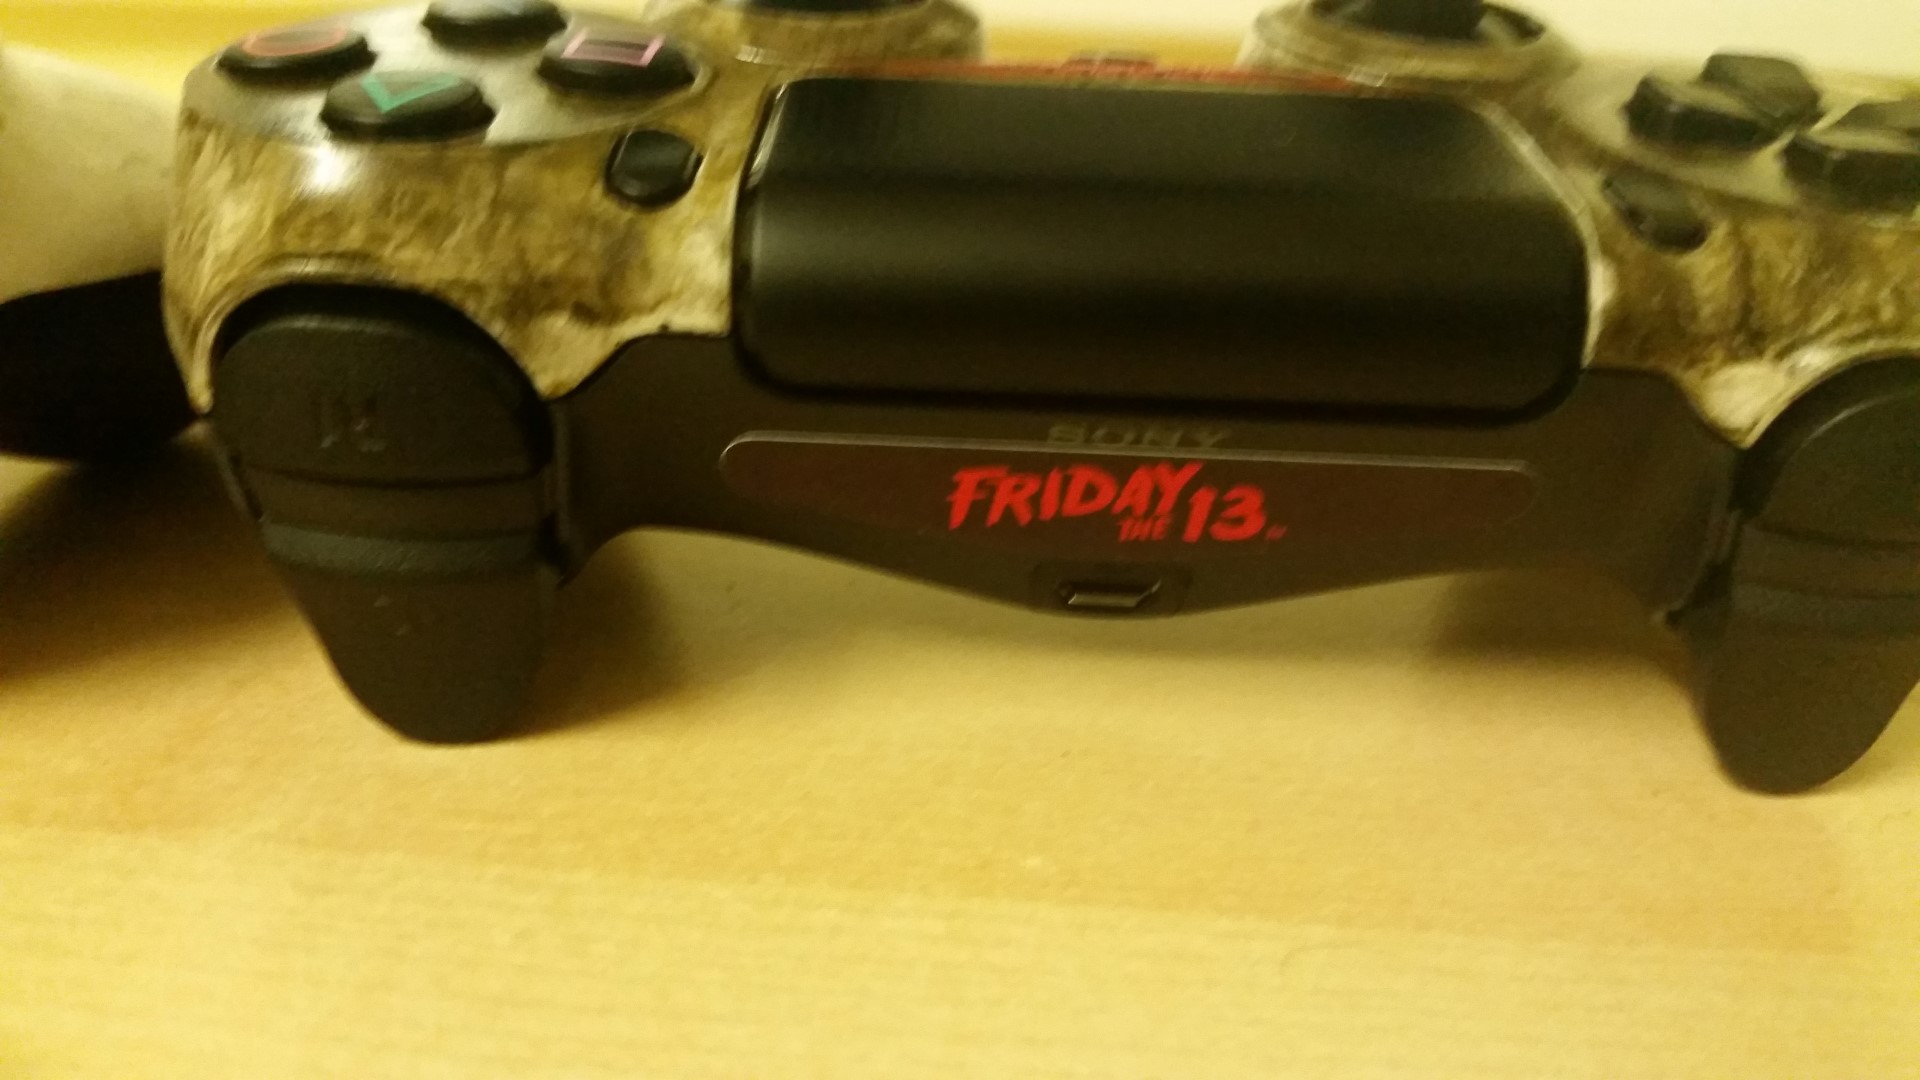 Made my own custom Friday the 13th PS4 controller. : r/F13thegame